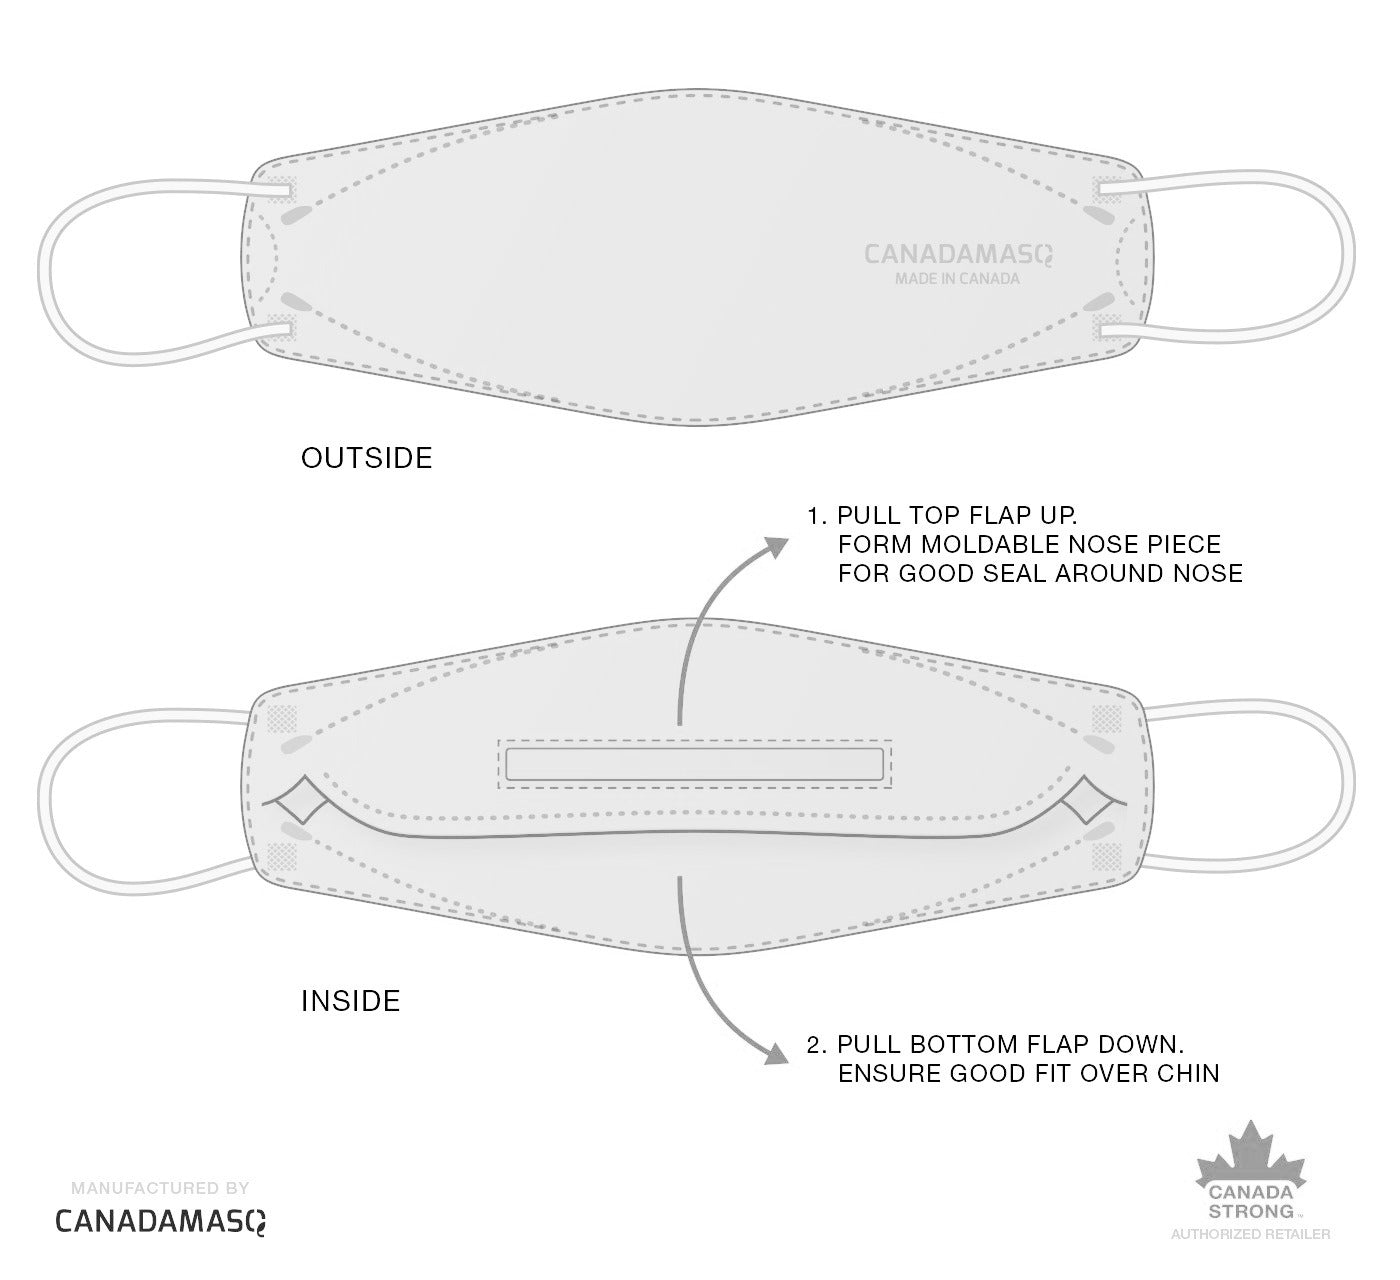 Diagram of the small canada masq white CA-N95 respirator mask canada strong